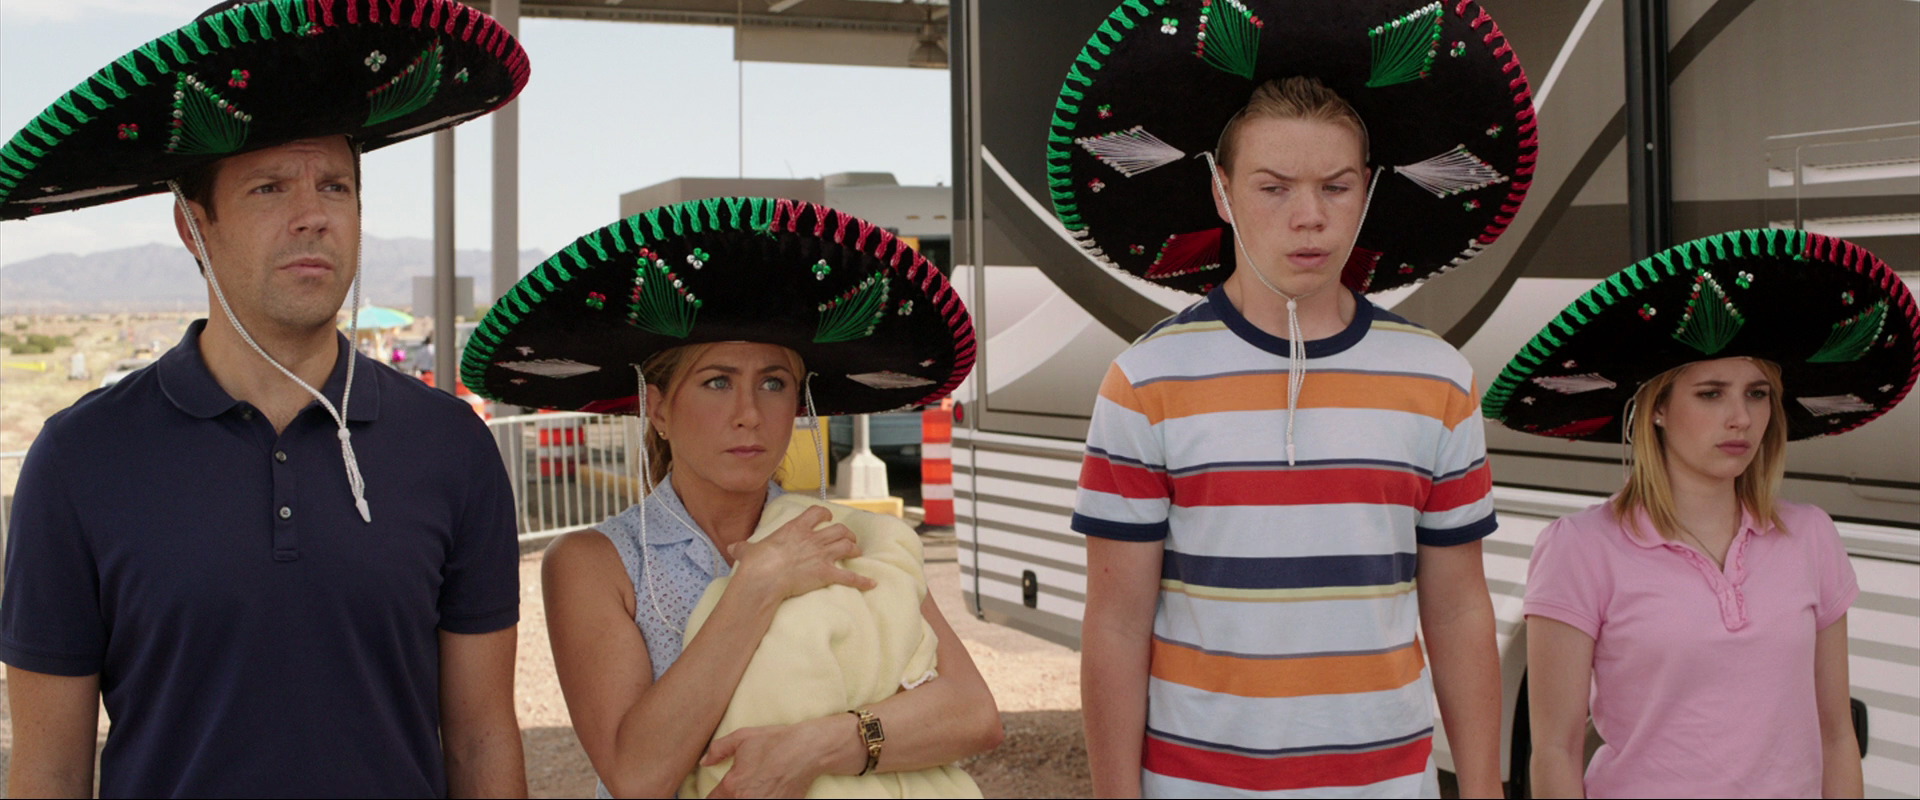 Screen Captures - were-the-millers-0591 - Will Poulter Photo Gallery.